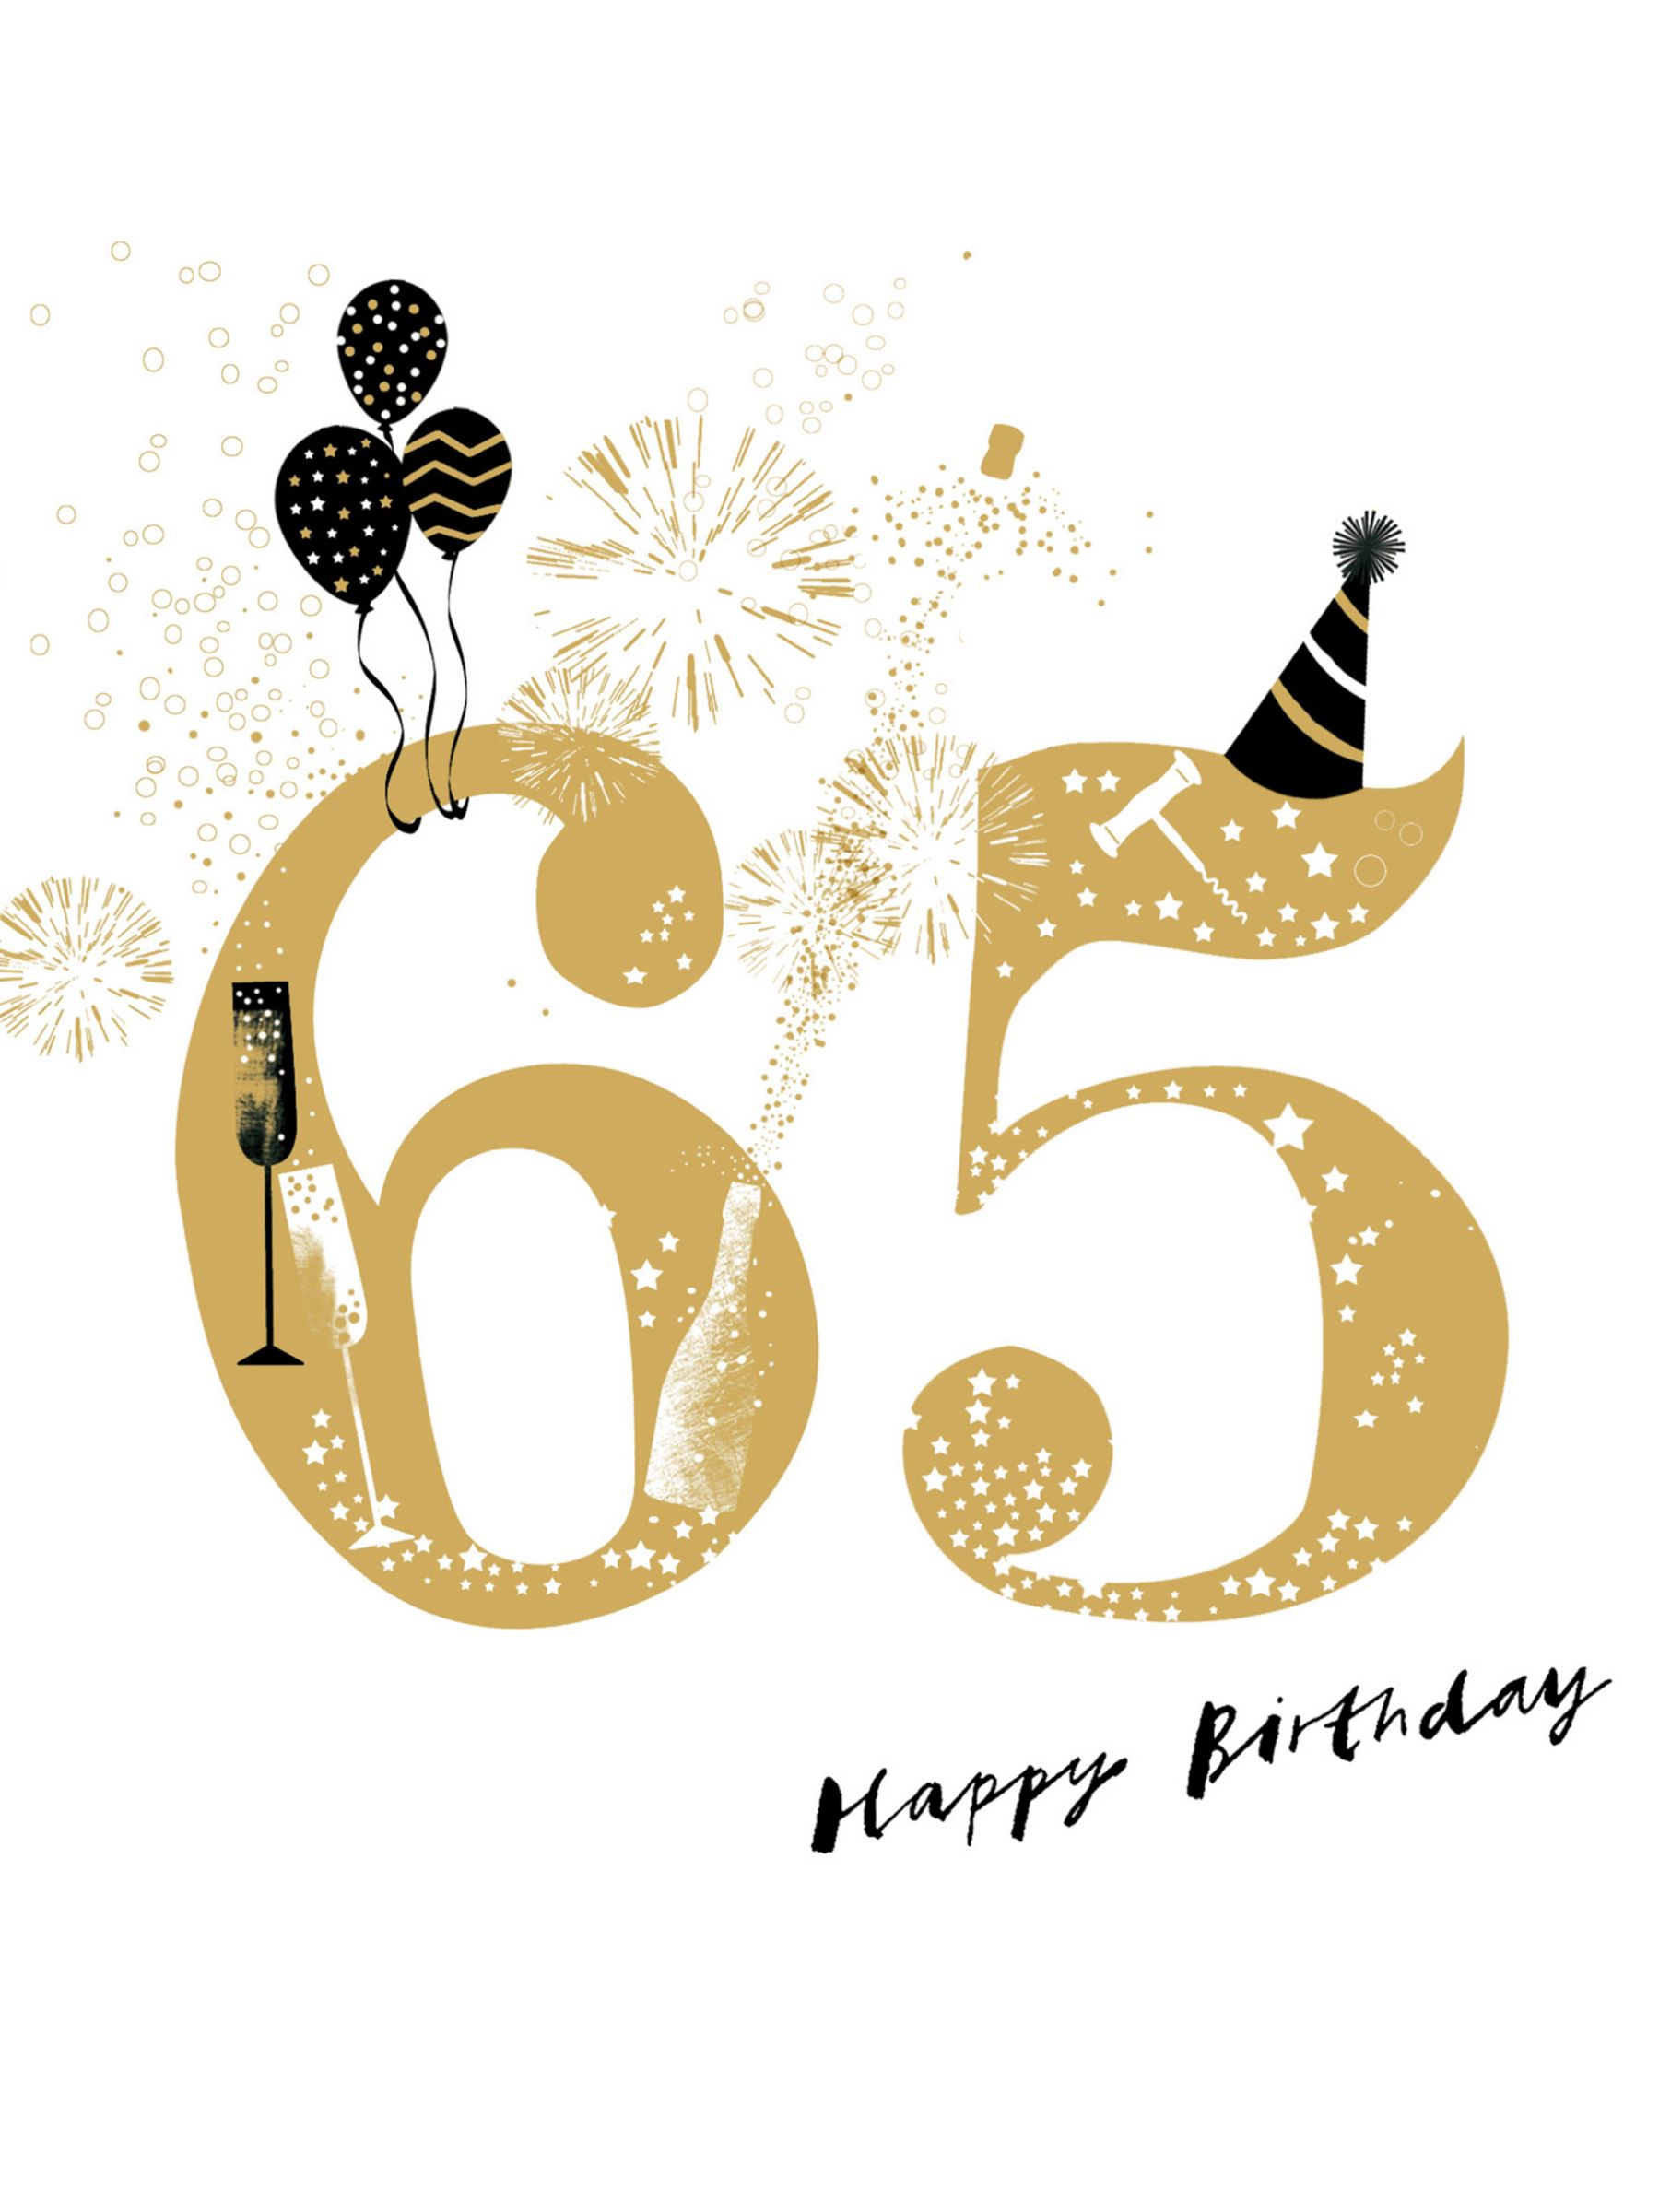 65th-birthday-cards-card-design-template